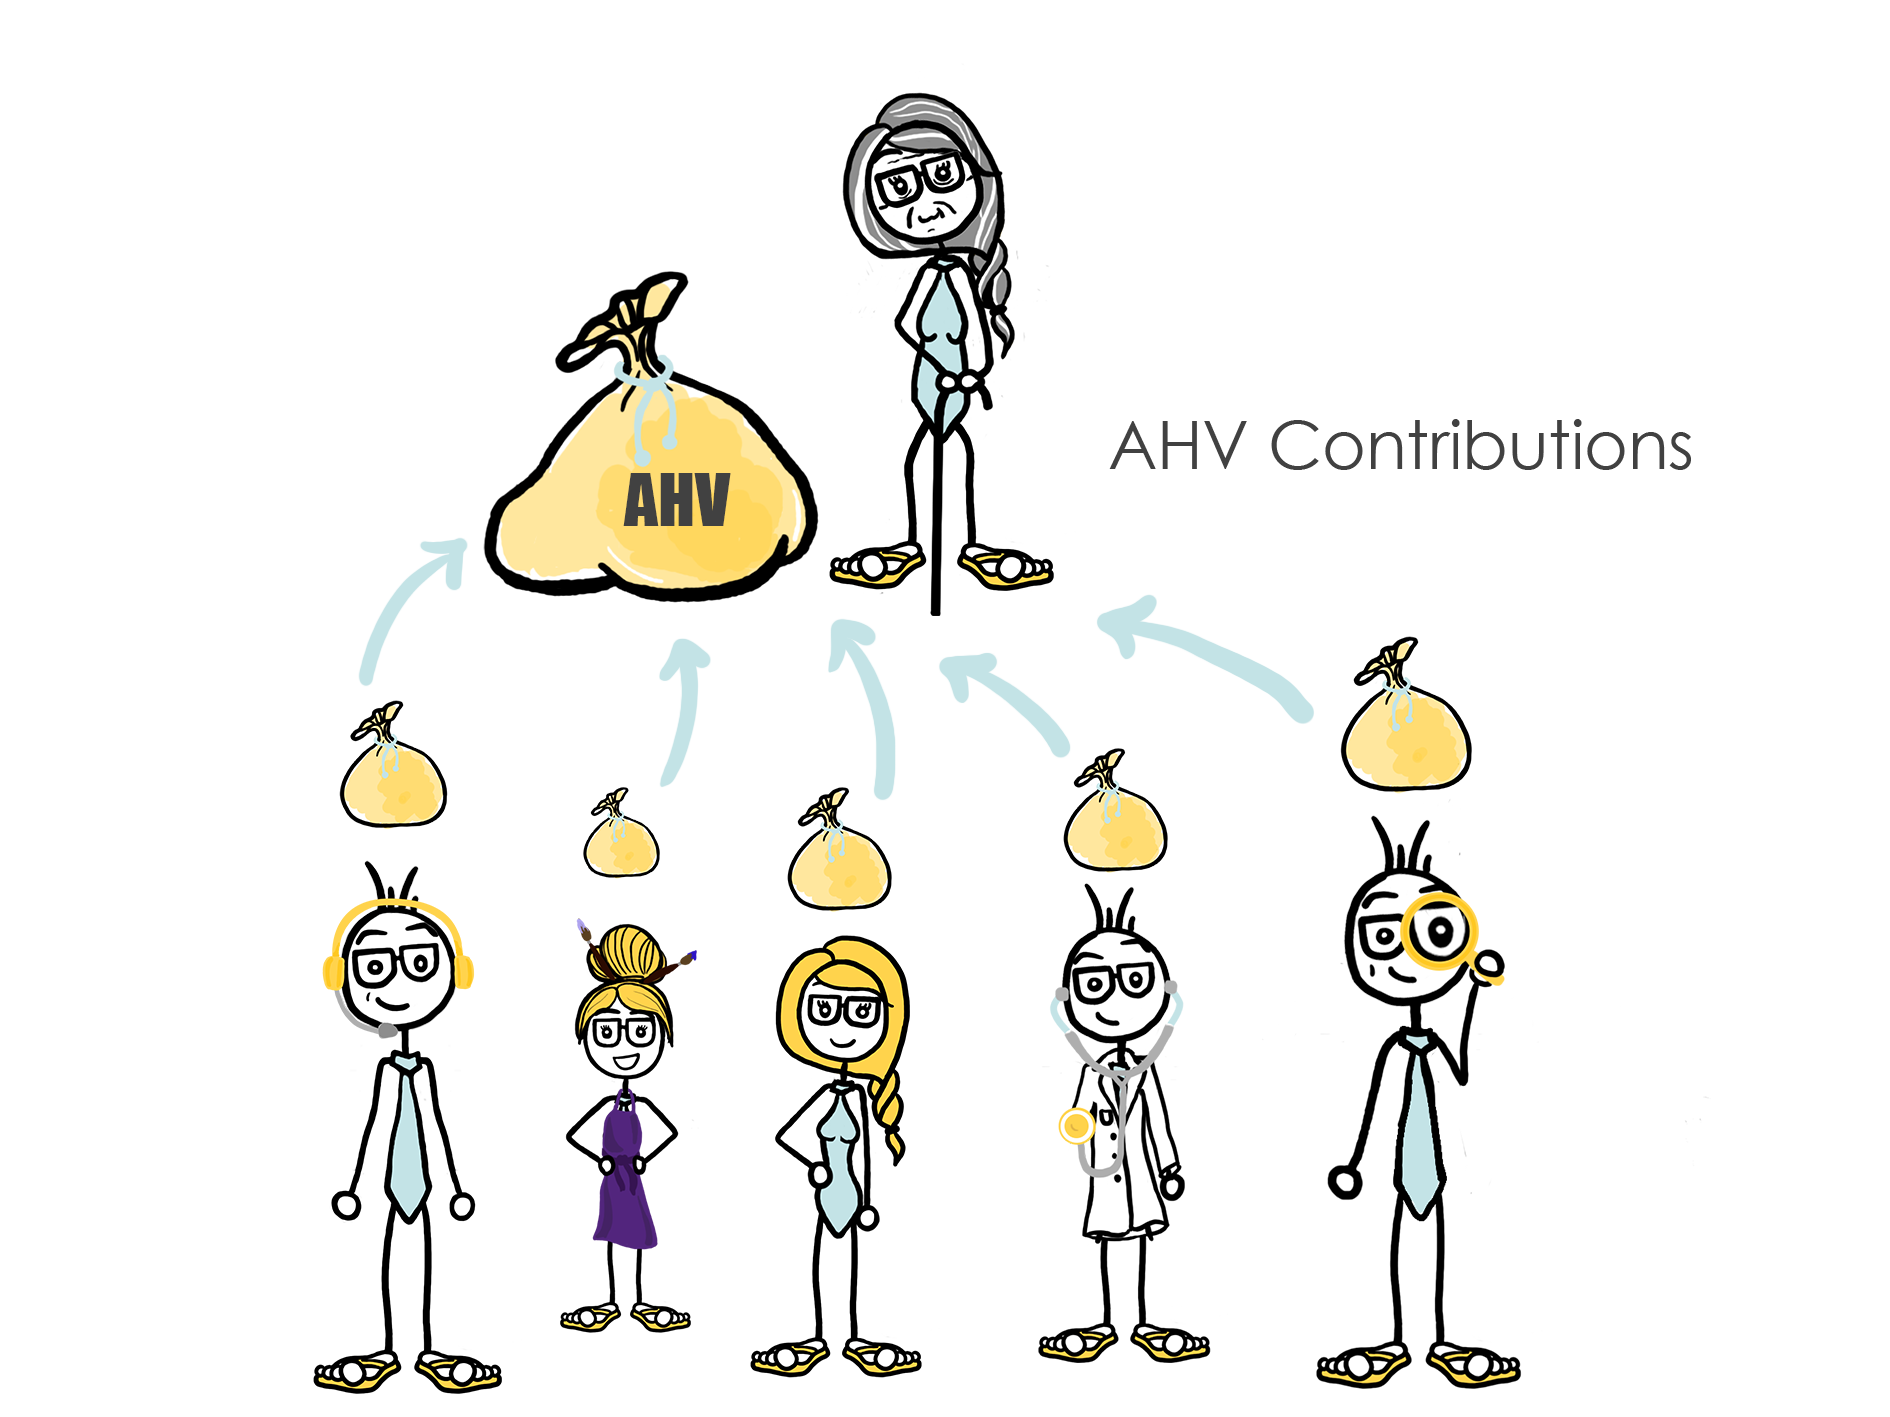 Figure showing the solidarity principle of the AHV and how AHV pensions are financed by people working, for people retired. 